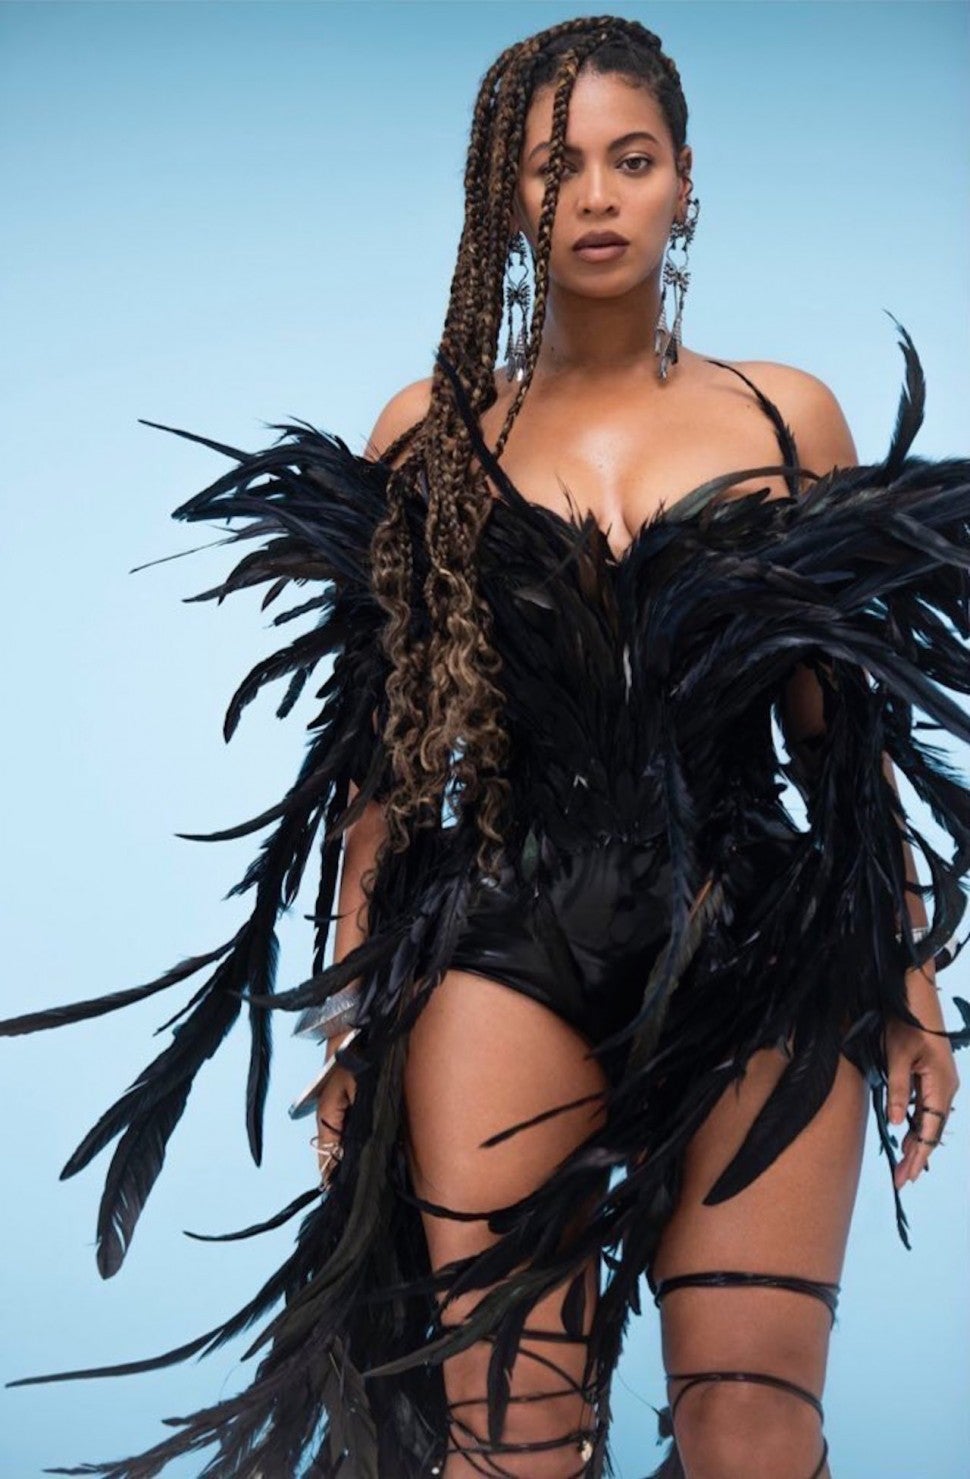 Beyonce fashion in 'Black Is King'